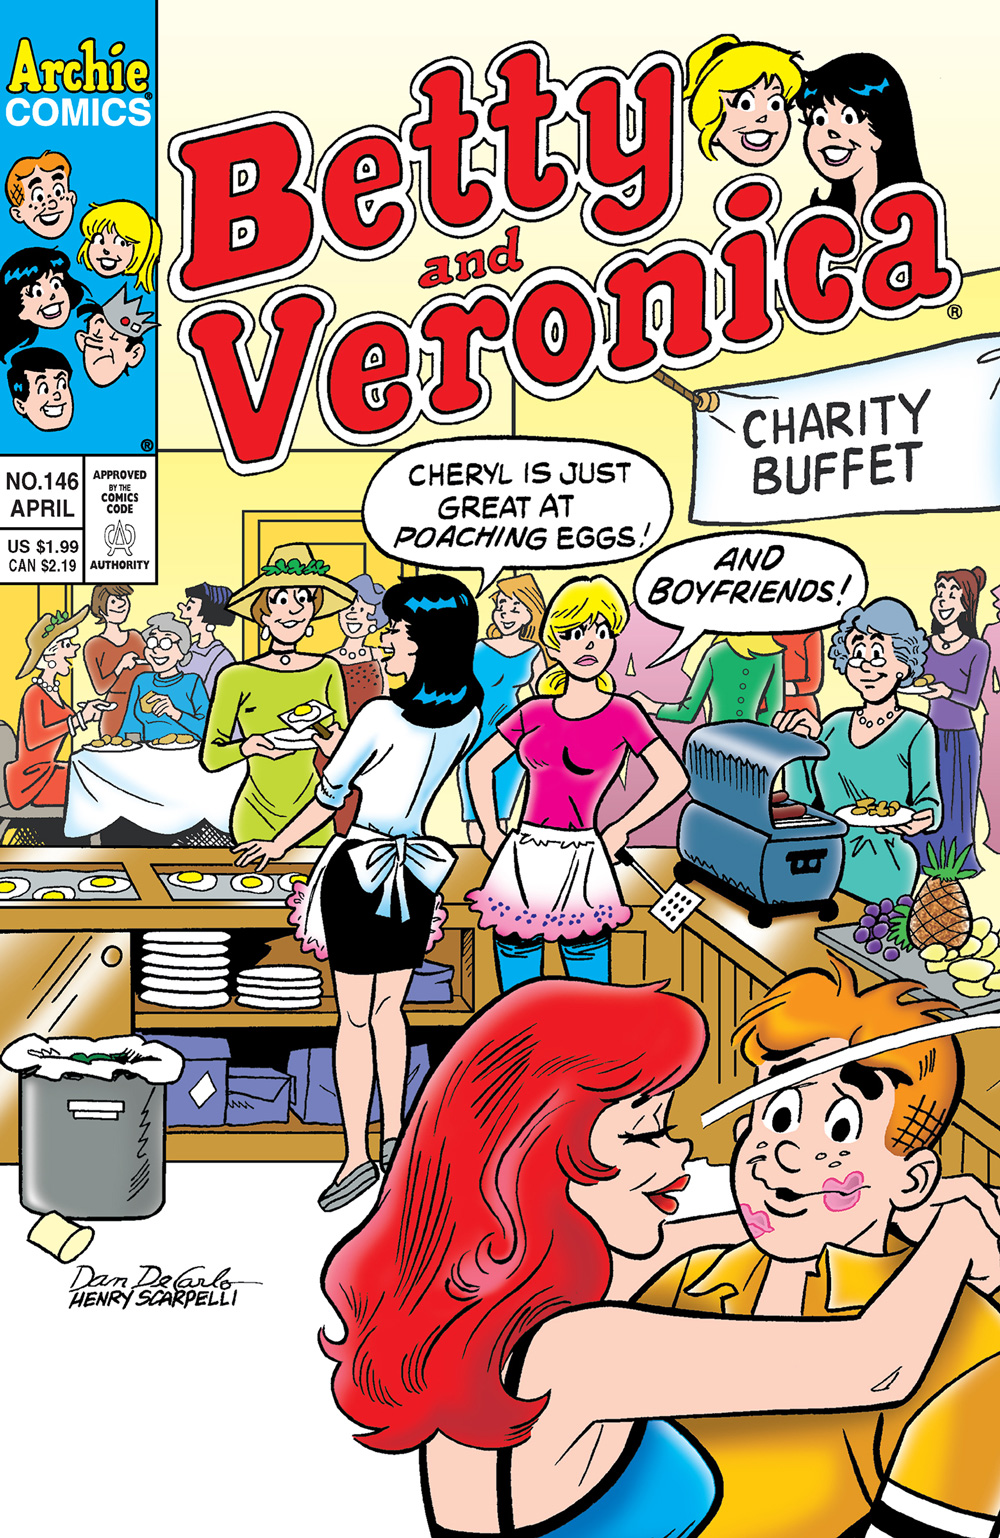 Betty and Veronica are serving food to customers at a buffet to benefit charity. Behind them, Cheryl Blossom is kissing Archie. Veronica says Cheryl is good at poaching eggs, and Betty says she's also good at poaching boyfriends.